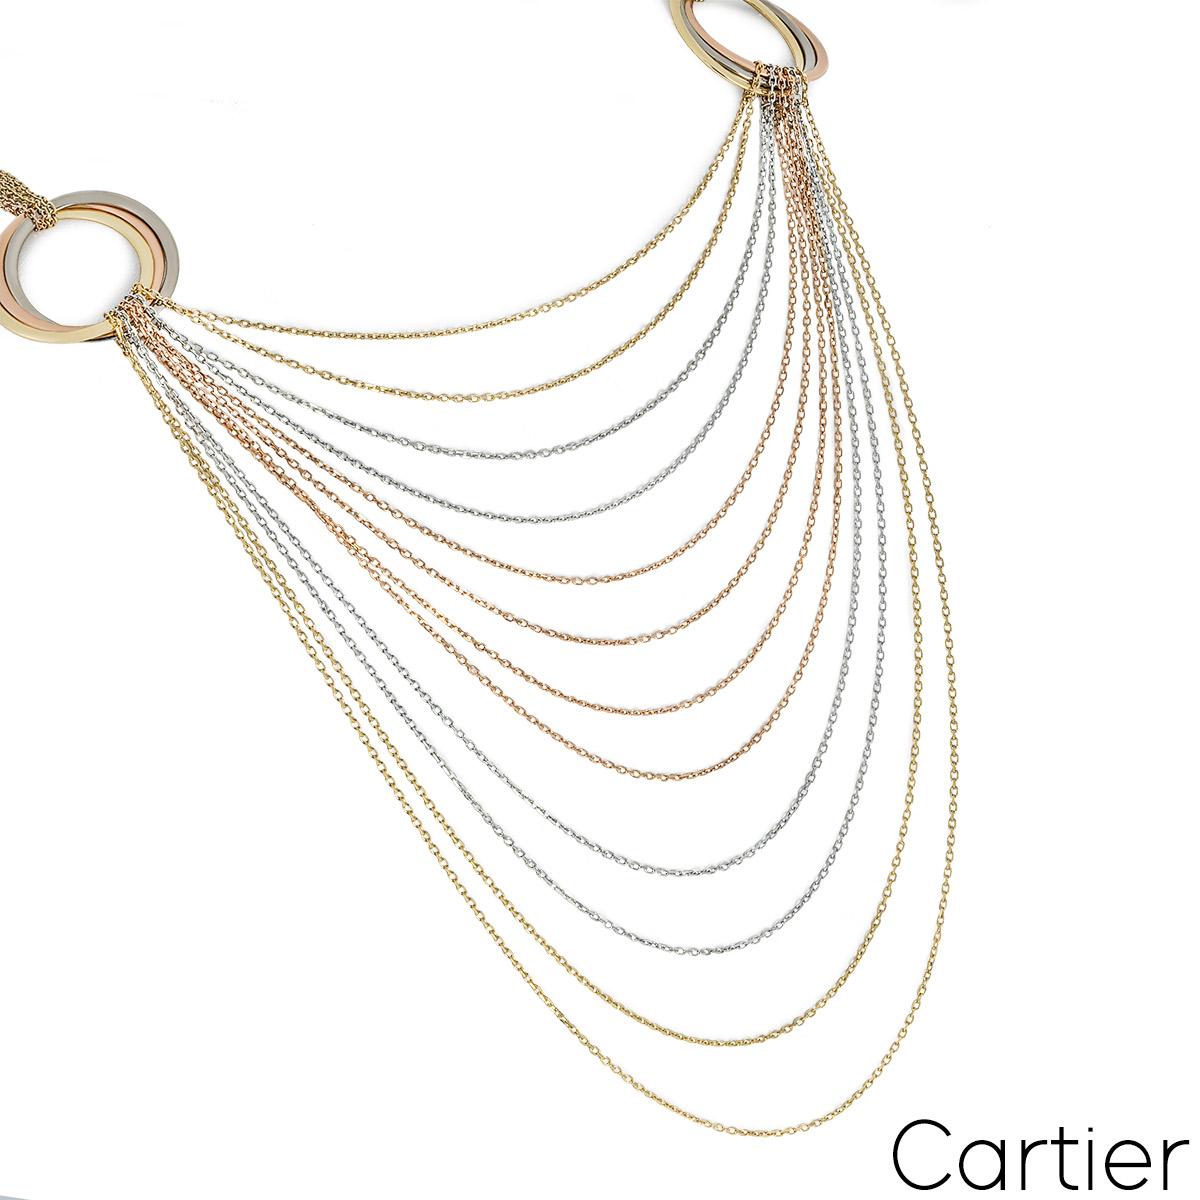 An eye-catching 18k tri-colour gold necklace by Cartier from the Trinity de Cartier collection. The necklace is composed of 12 yellow gold, rose gold and white gold graduating chains suspended from two evenly spaced iconic Trinity motifs. The